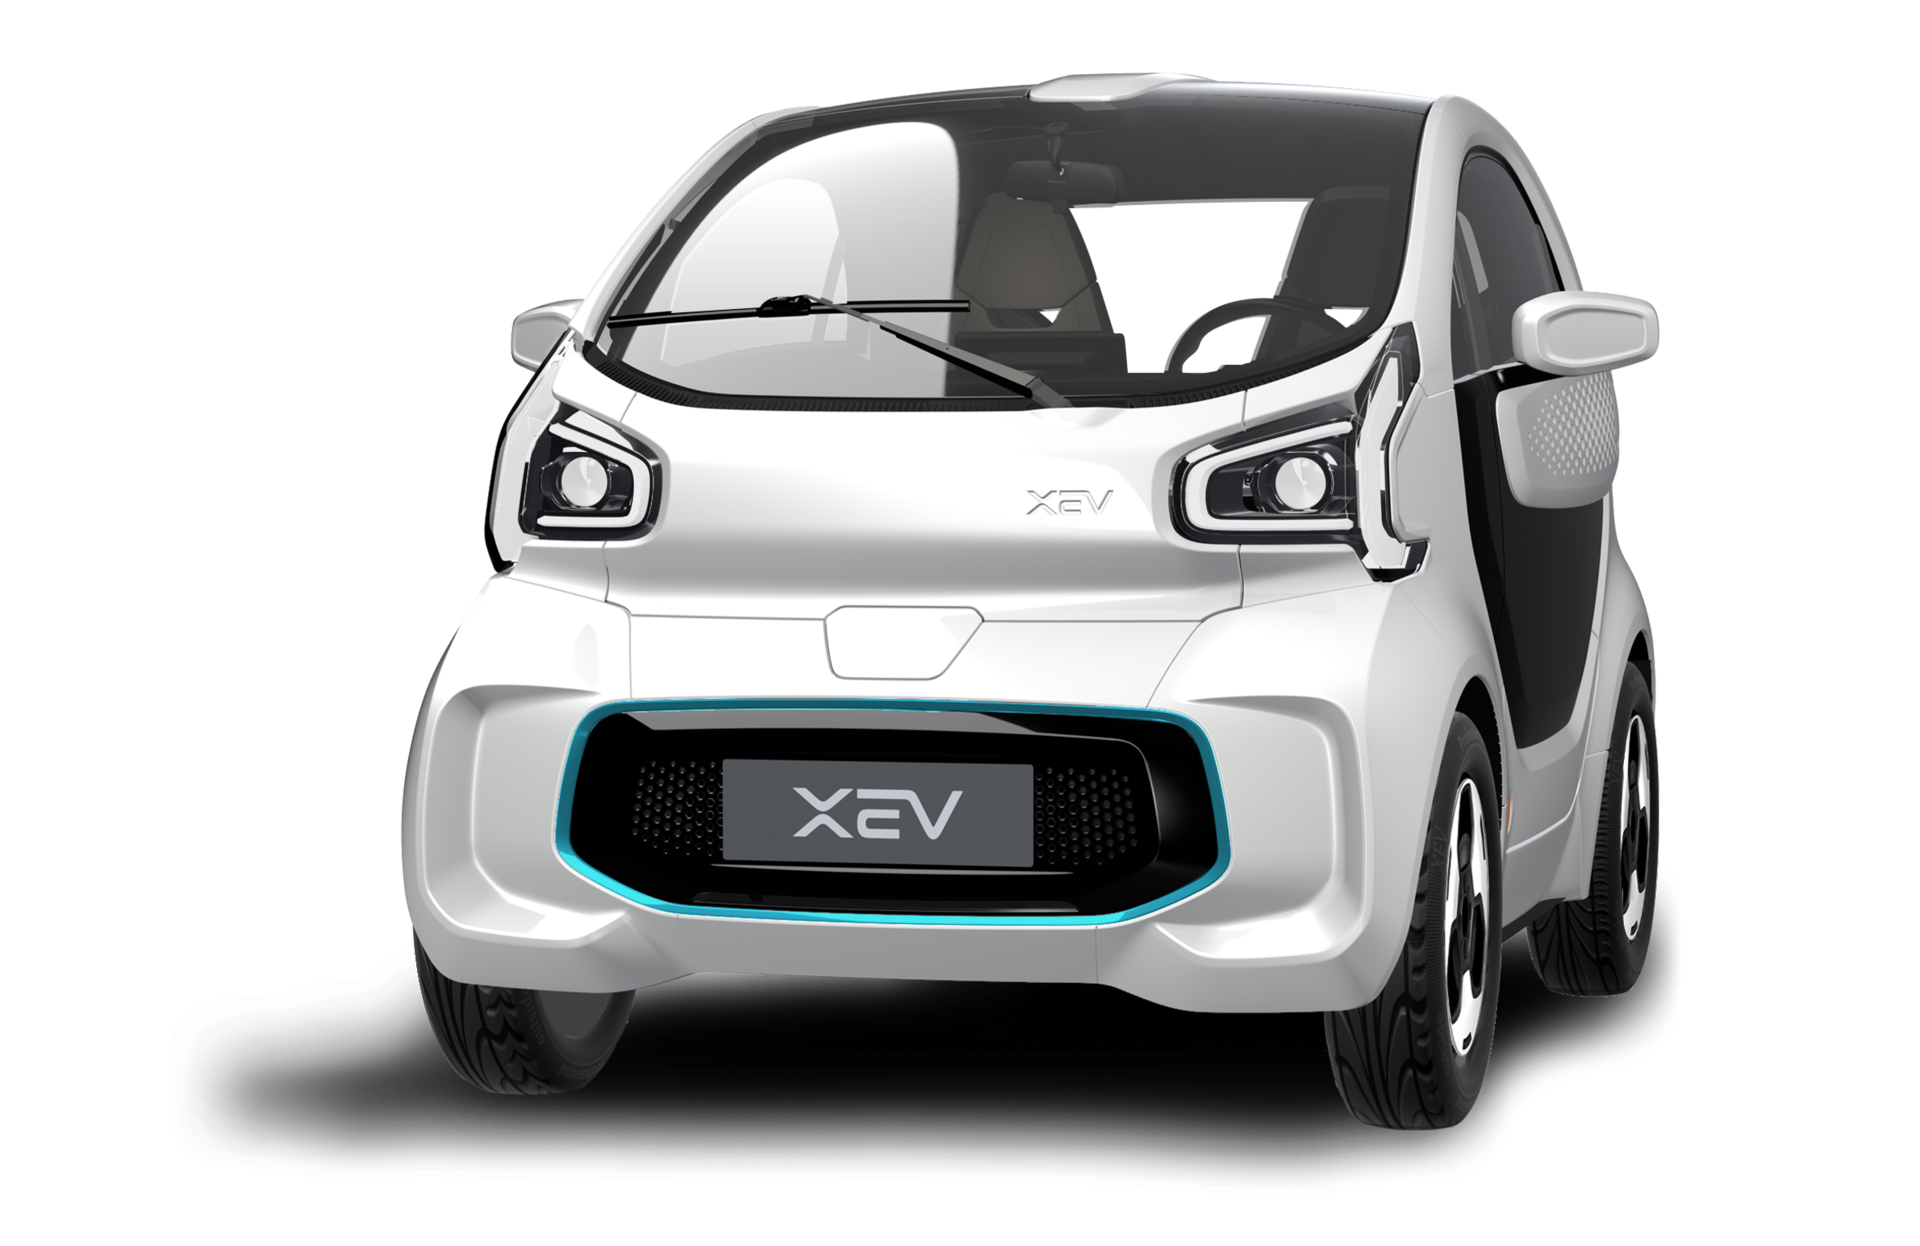 XEV Yoyo Compact in White pre-registered in SABADELL for € 14,990.-